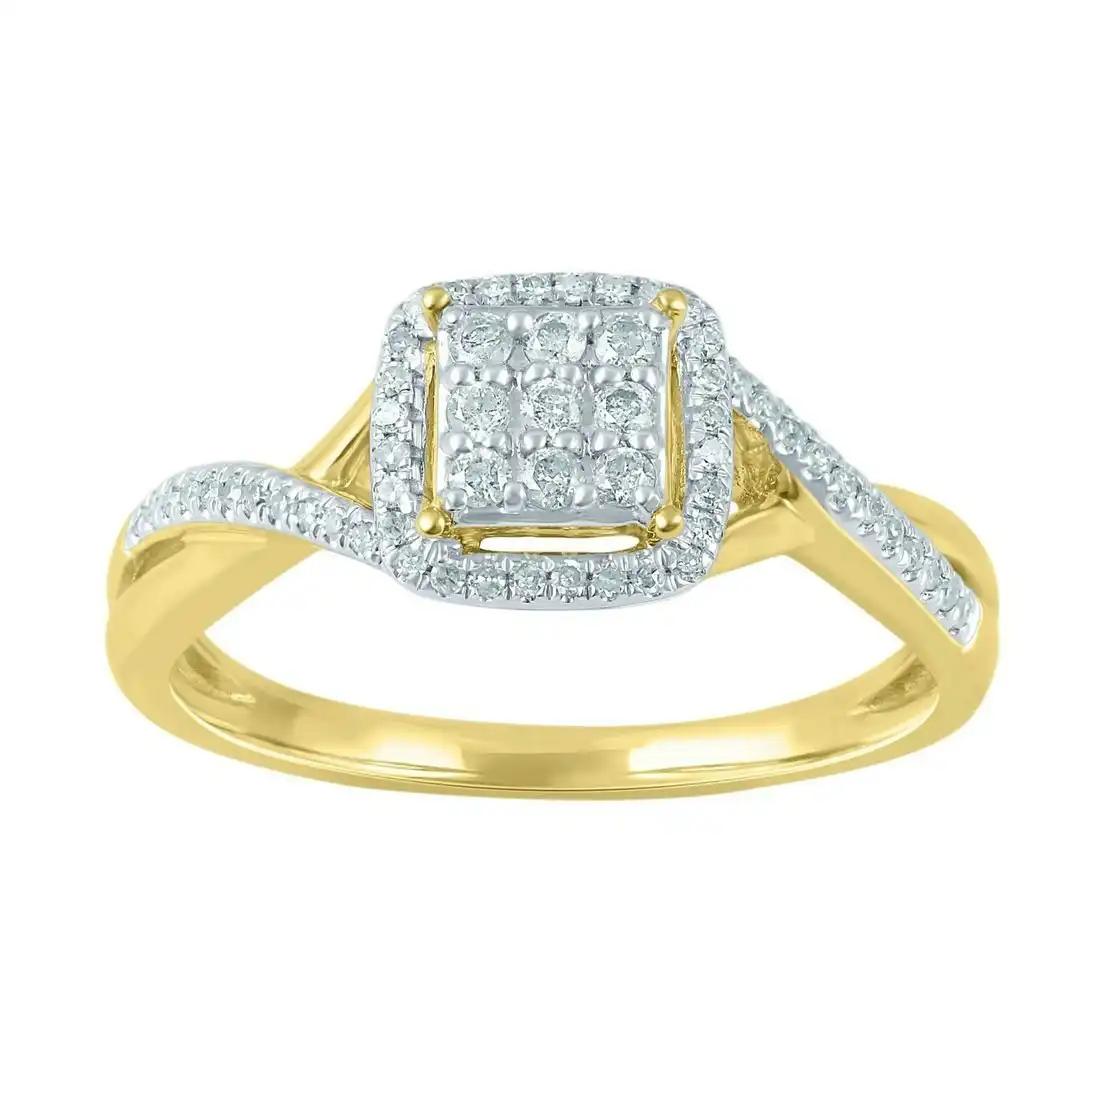 Brilliant Square Look Halo Ring with 1/5ct of Diamonds in 9ct Yellow Gold